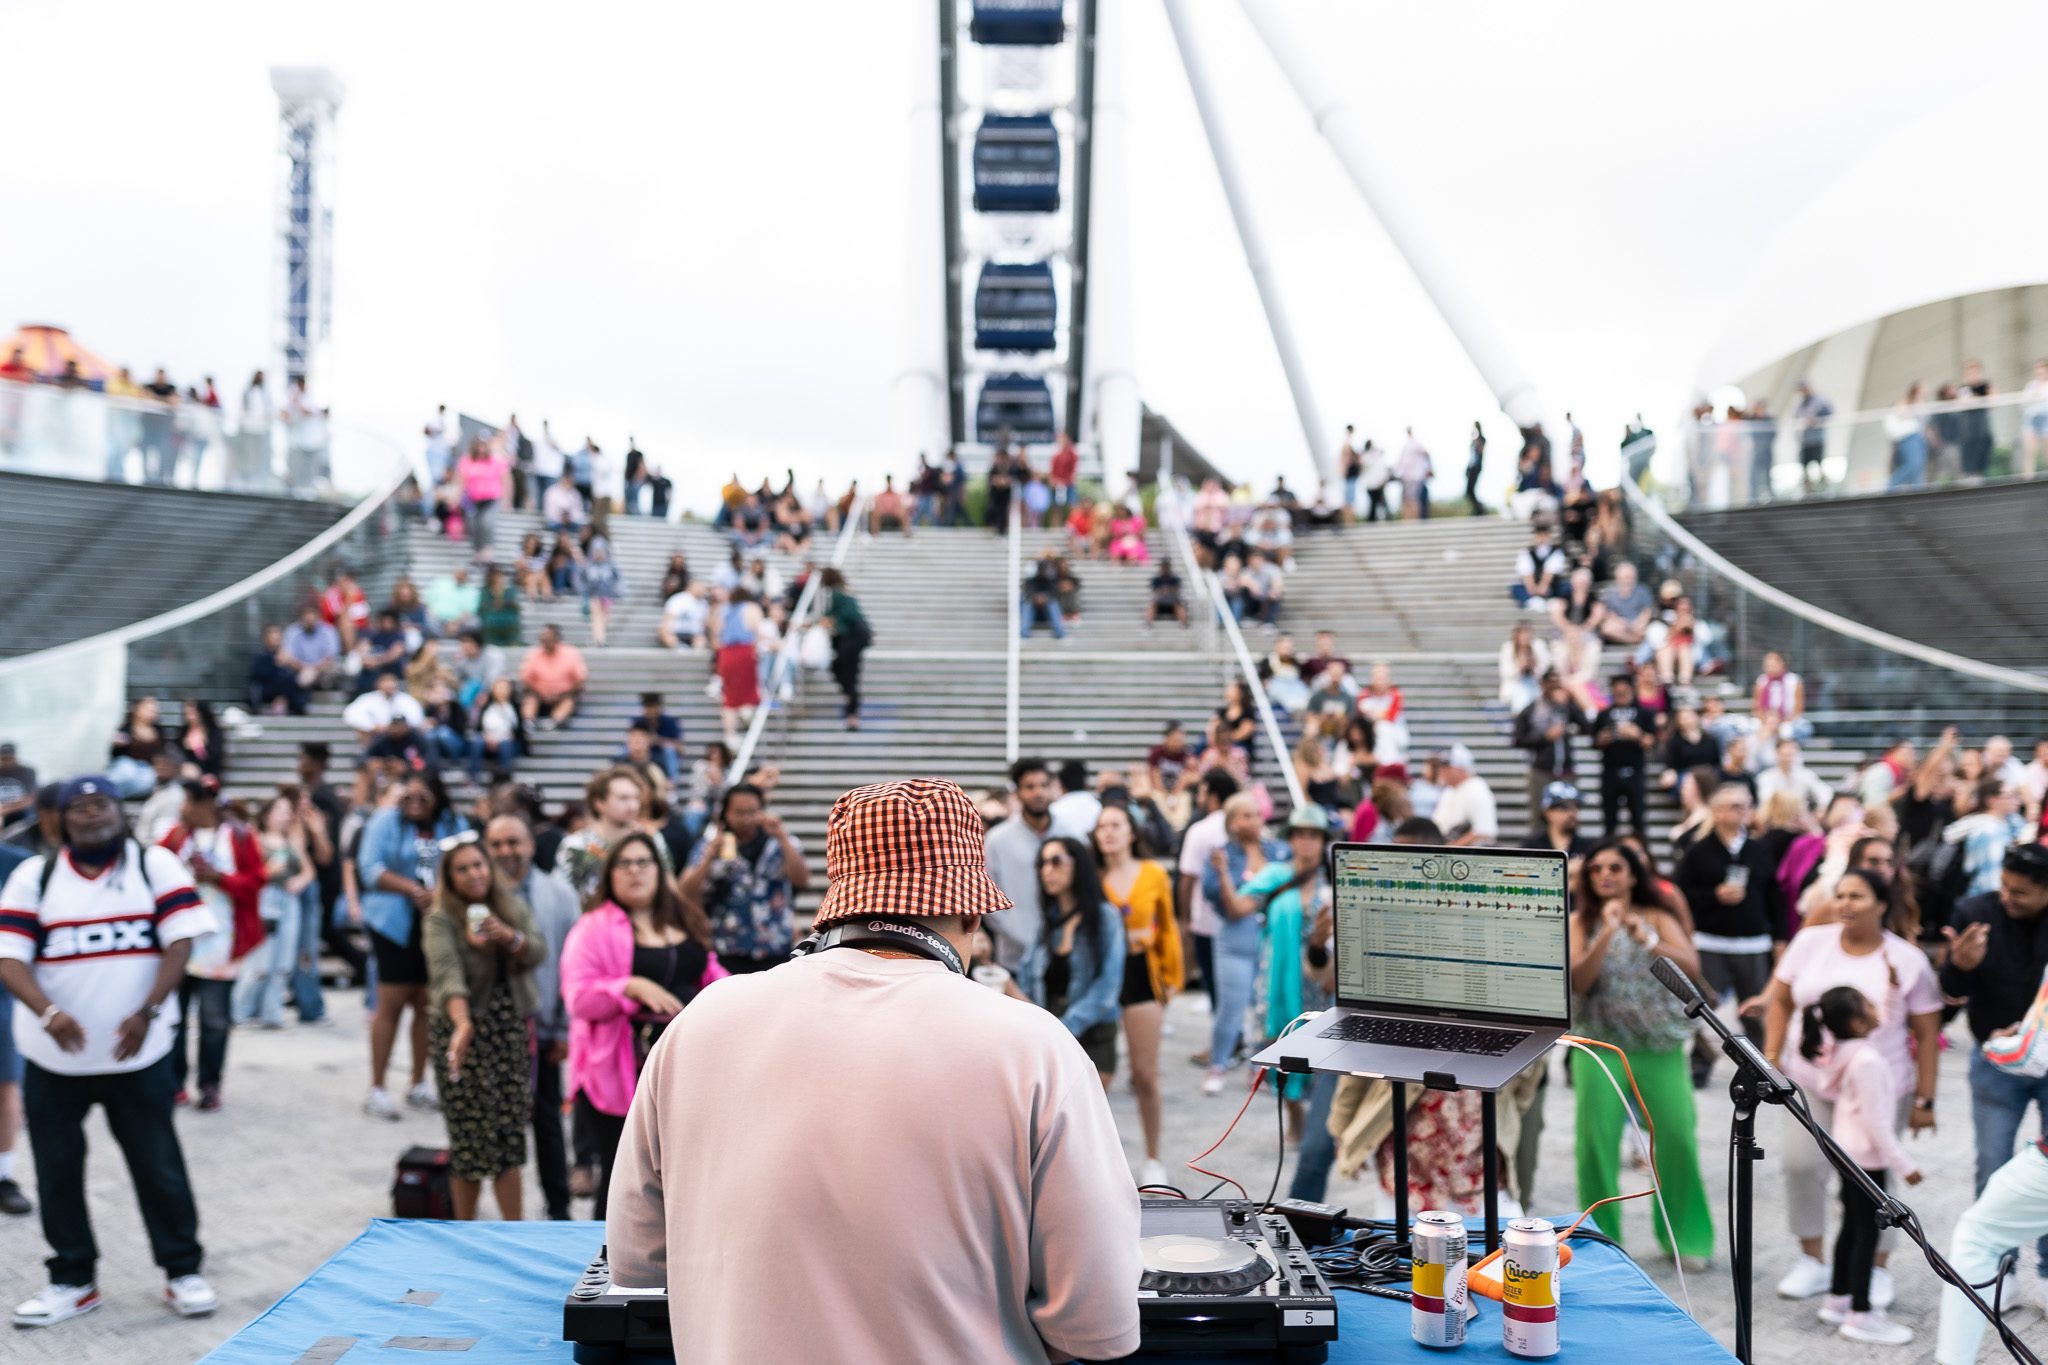 Navy Pier to Celebrate 40th Anniversary of Chicago House Music with Summer-long Programming